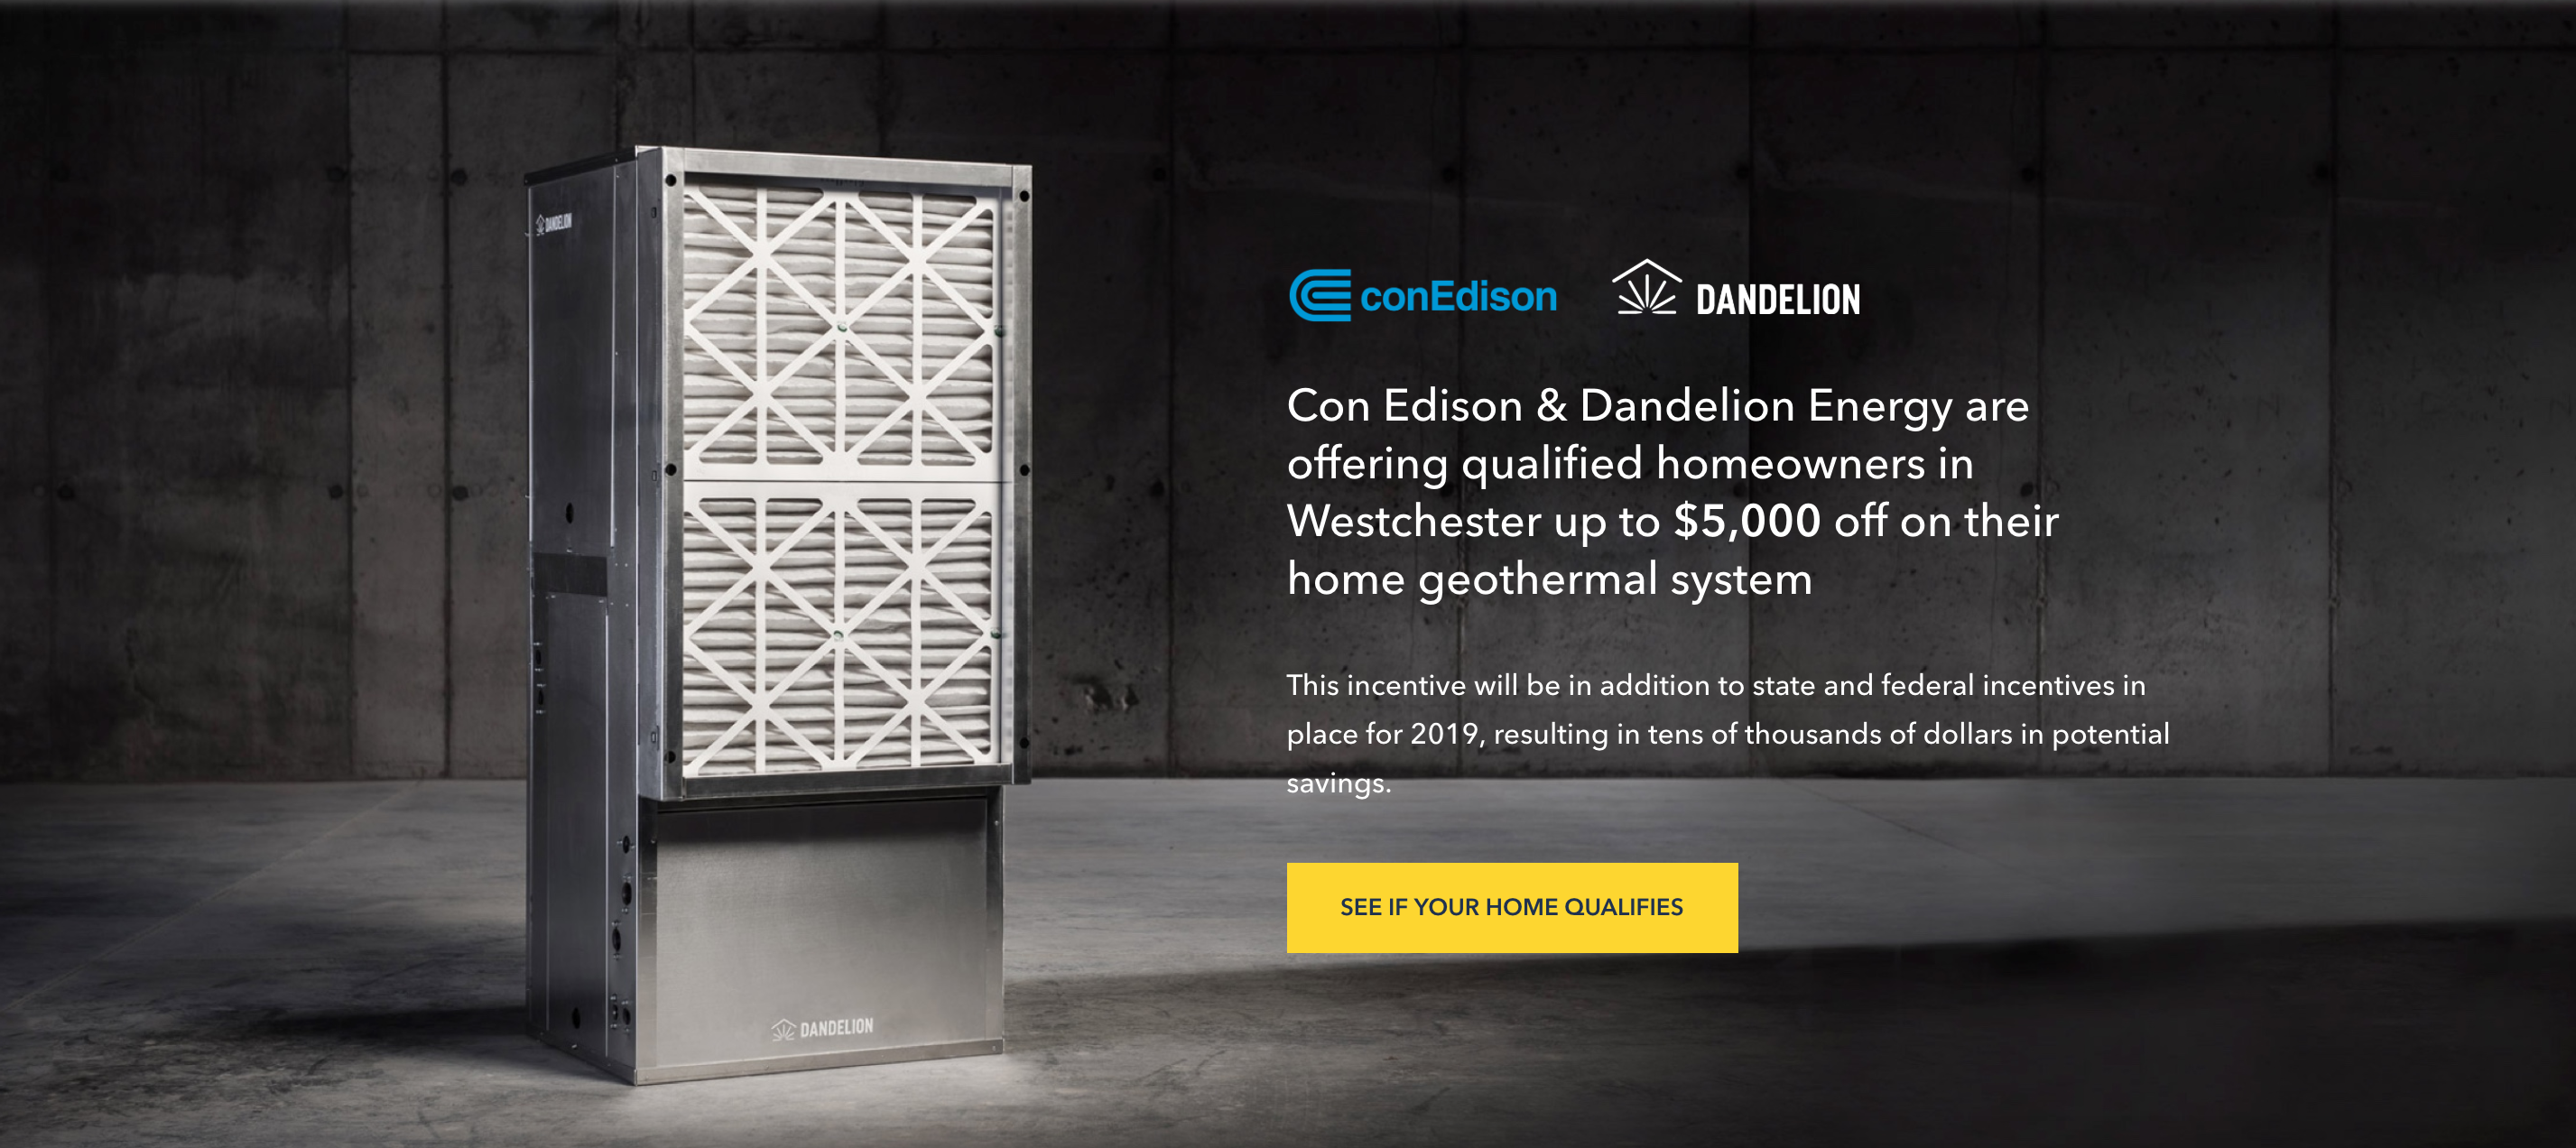 ConEd & Dandelion offer $5K credit on geothermal following natural gas moratorium in Westchester